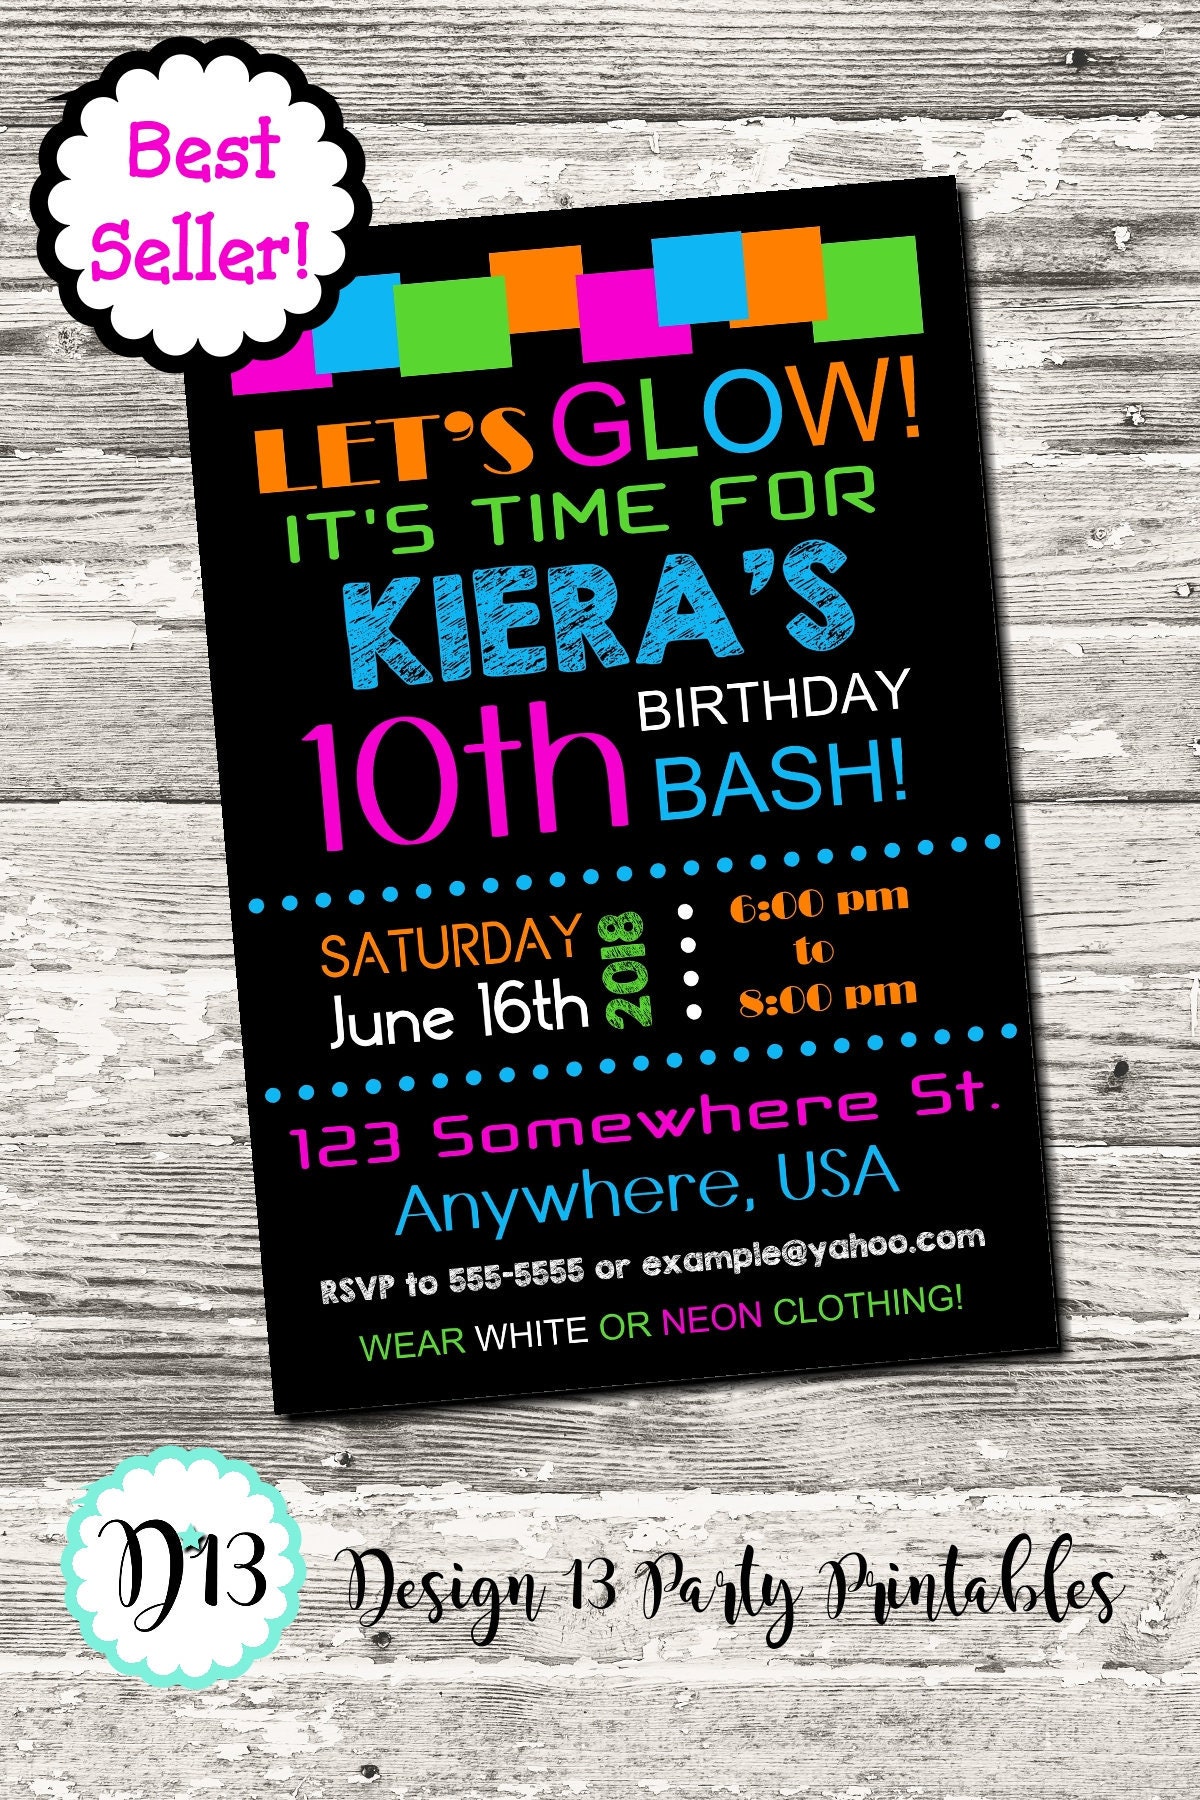 glow-neon-birthday-party-invitation-with-free-thank-you